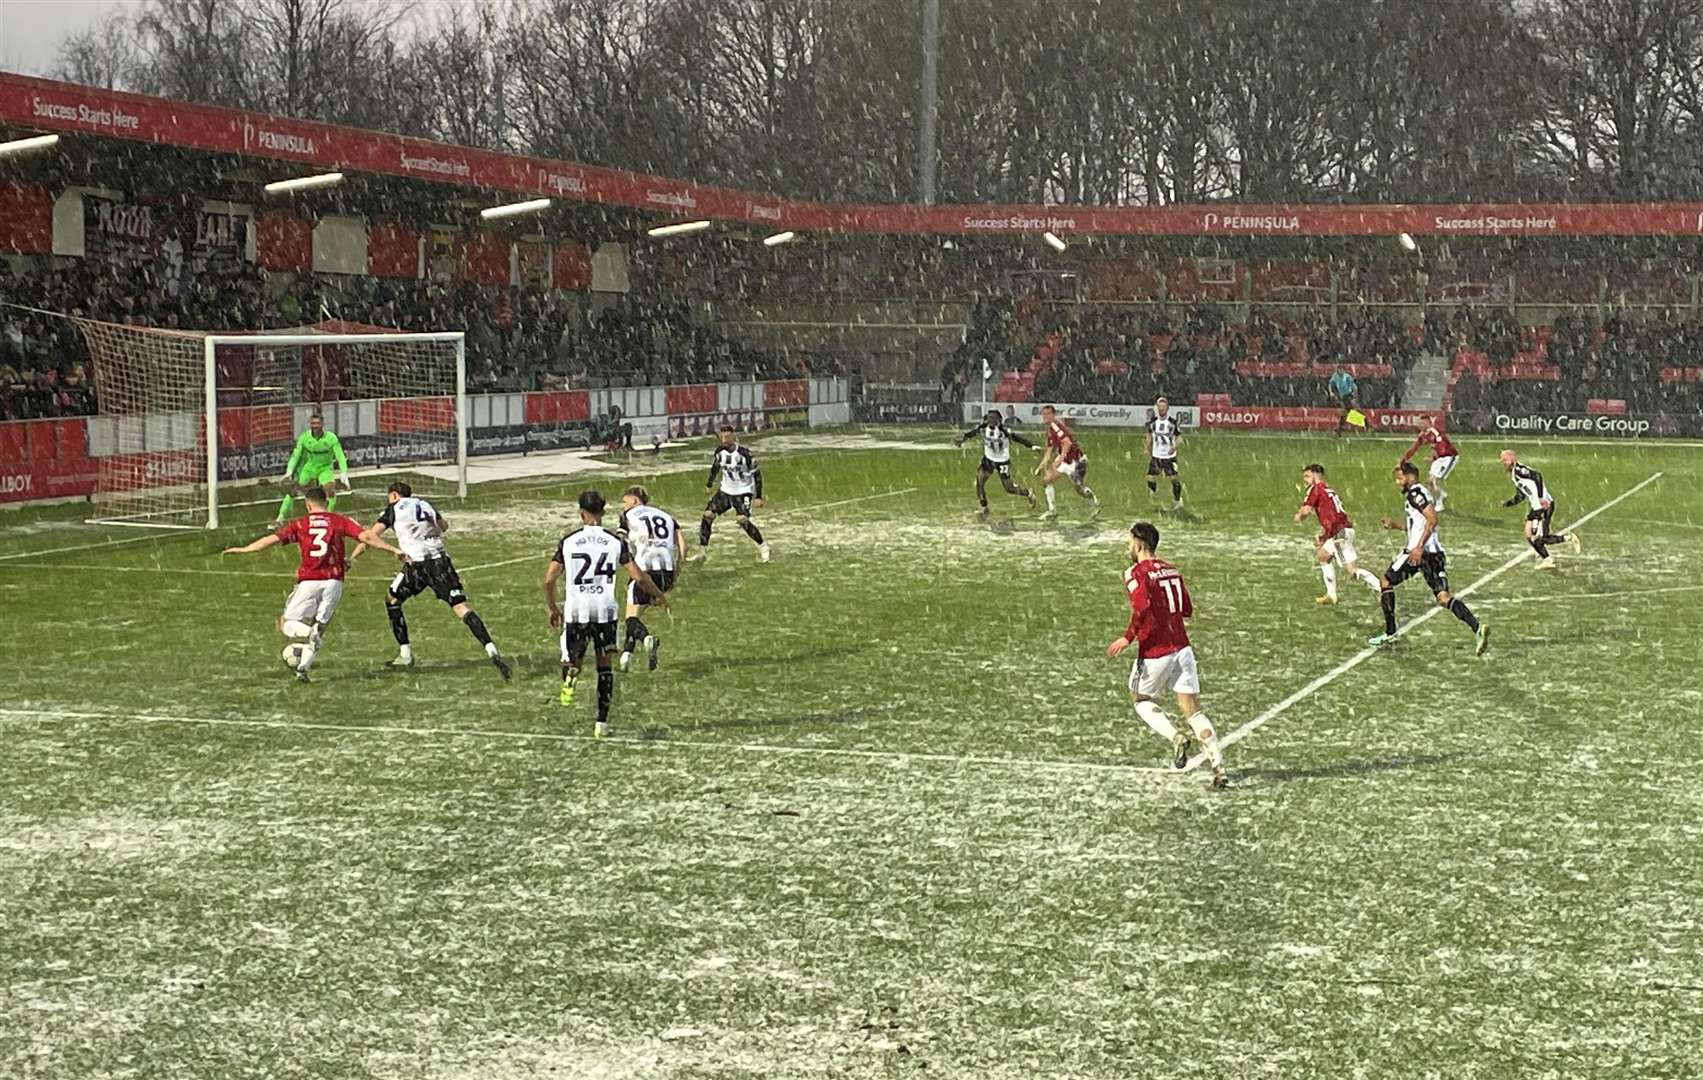 Conditions weren't ideal for the Gills at Salford